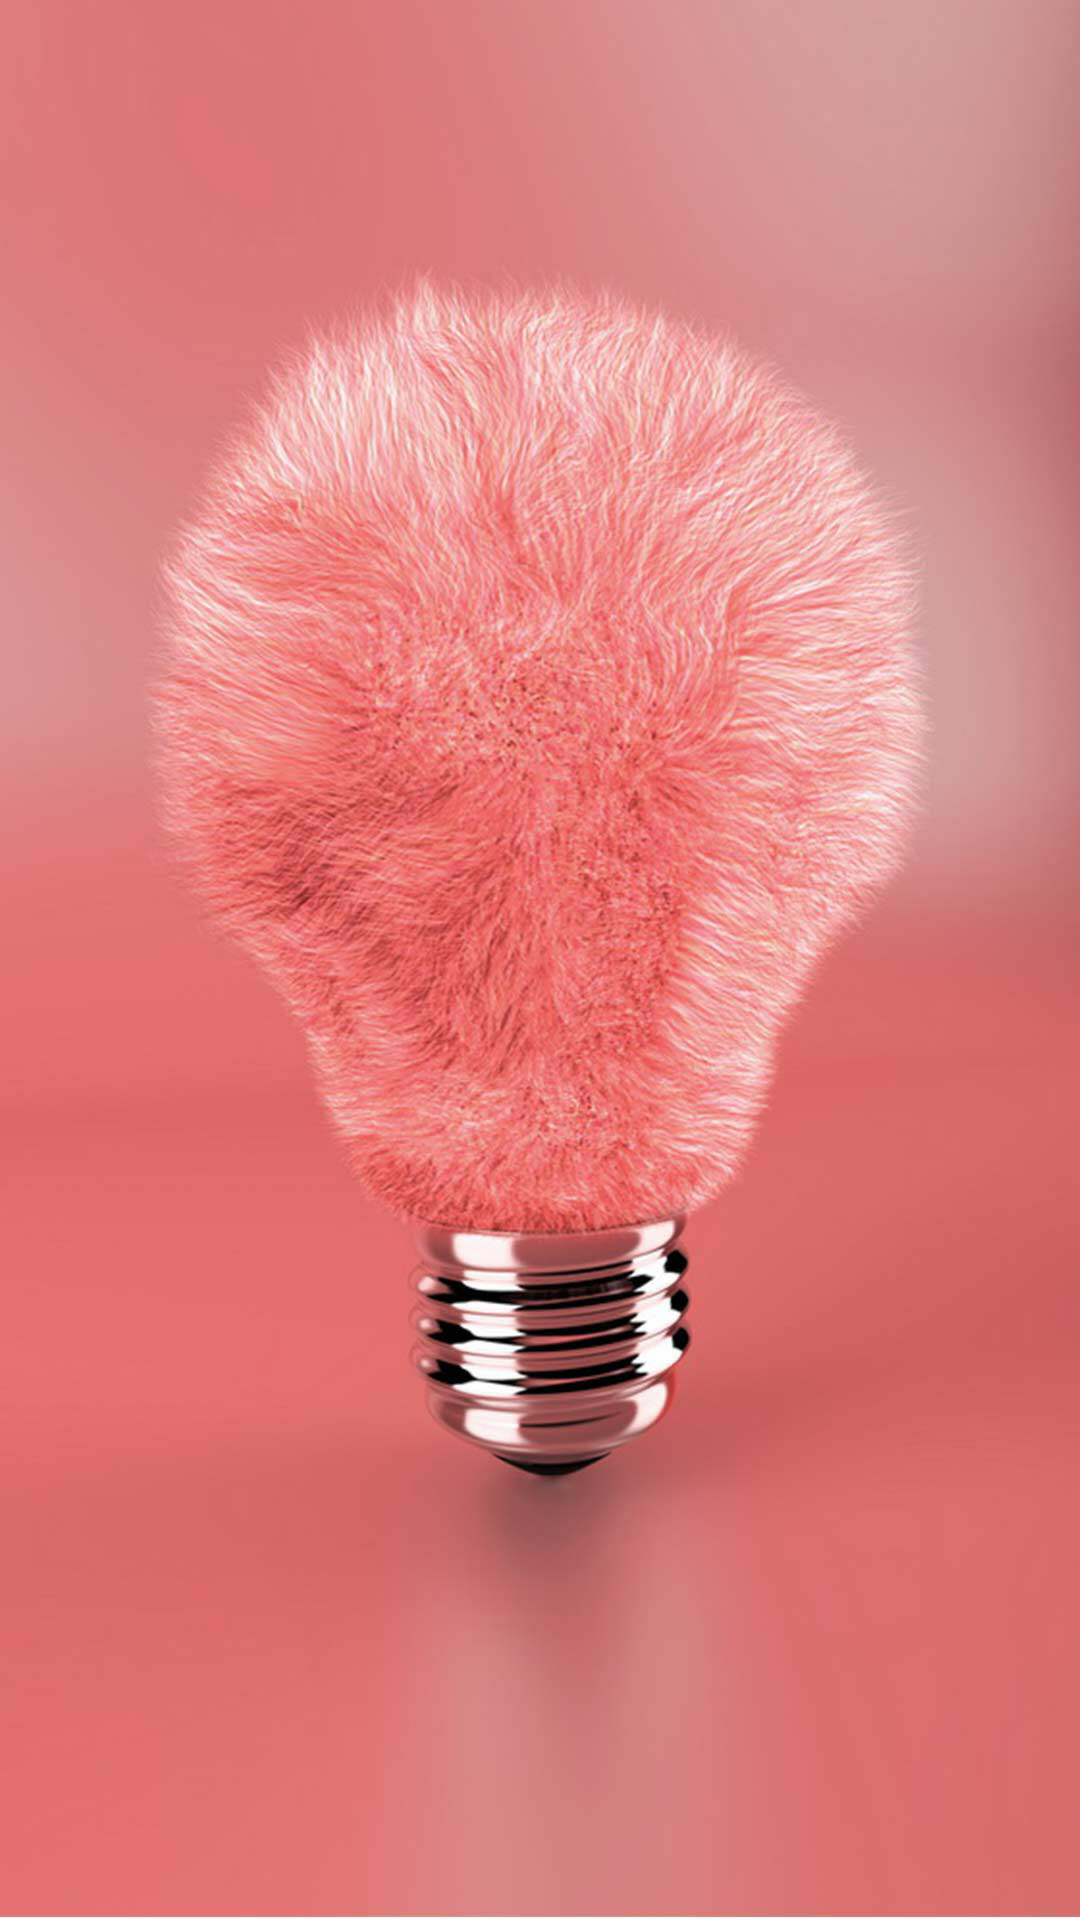 1080x1920, Furry Light Finding More Cute And Lovely - Rose Gold Pink Fur , HD Wallpaper & Backgrounds